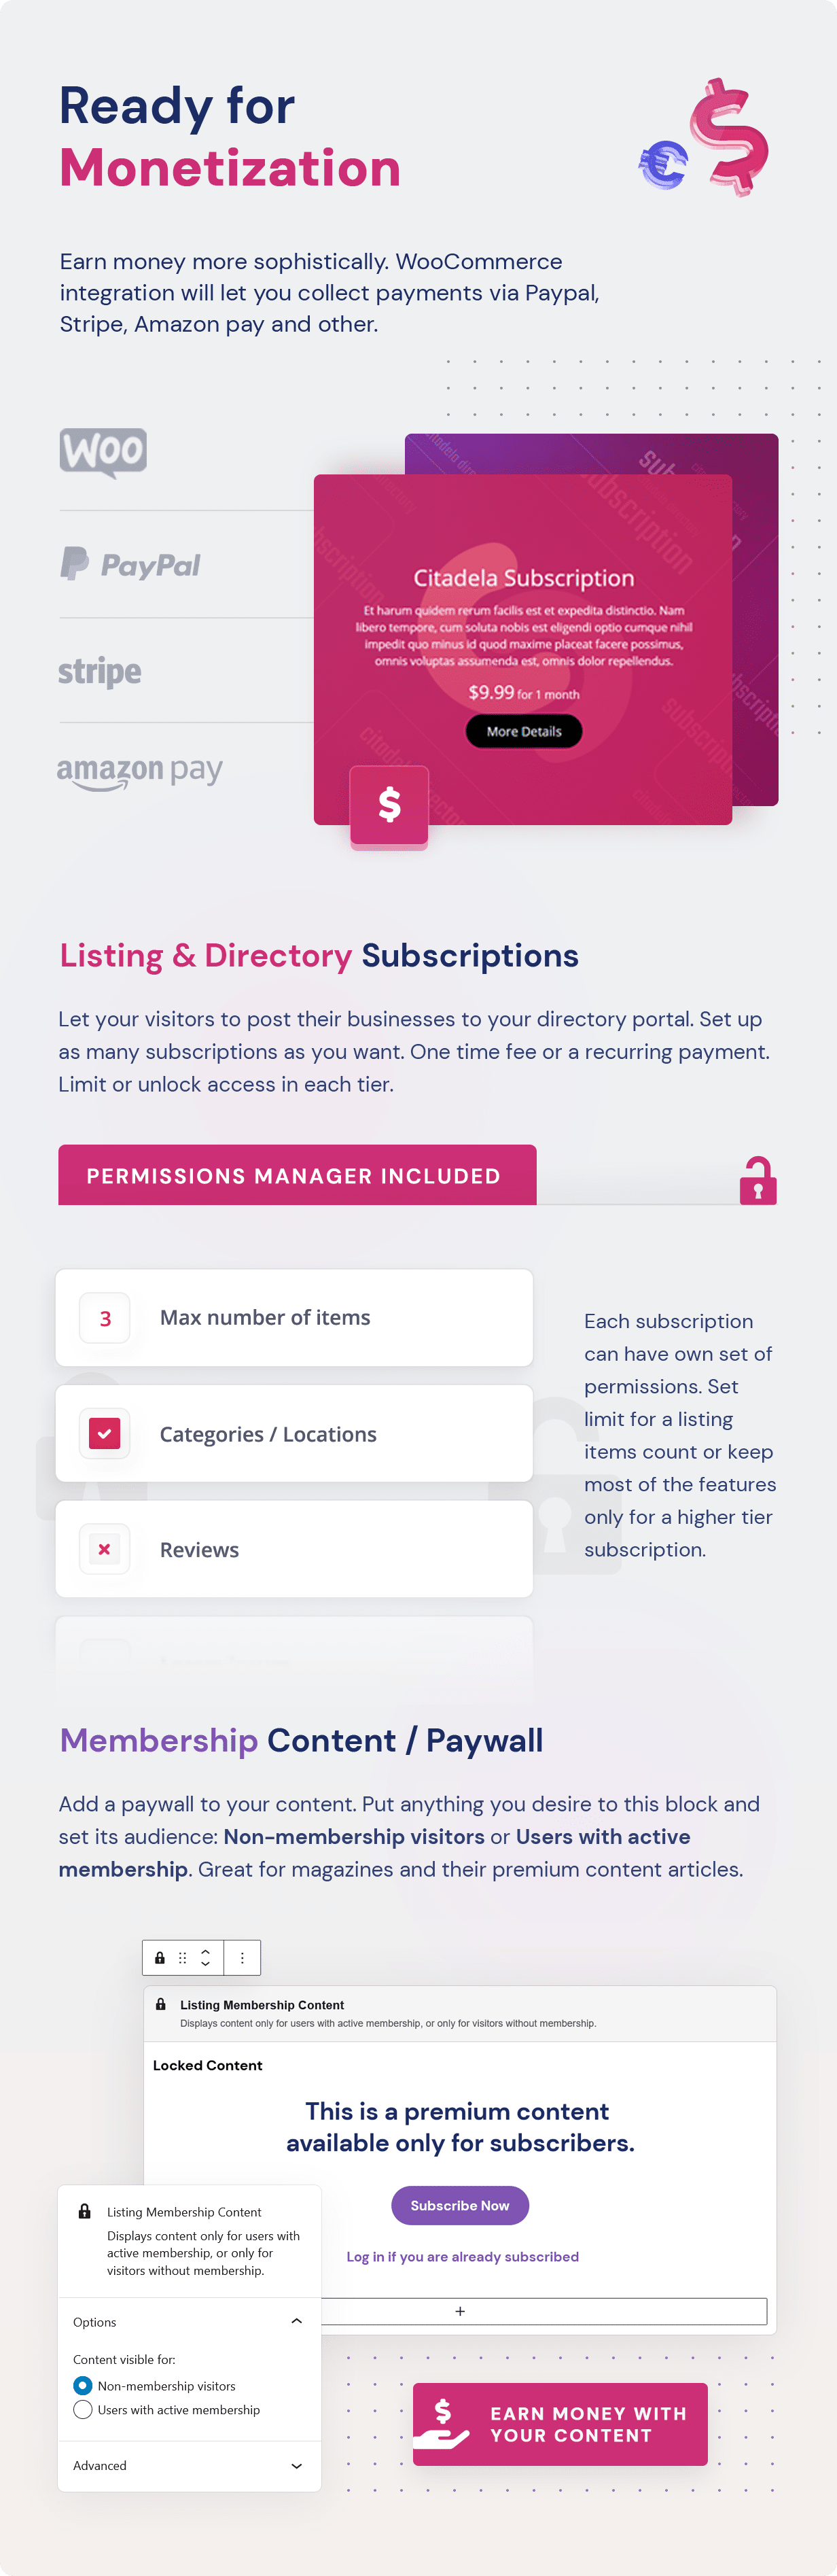 Ready for monetization - Listing & Directory Supscriptions, Membership Content / Paywall